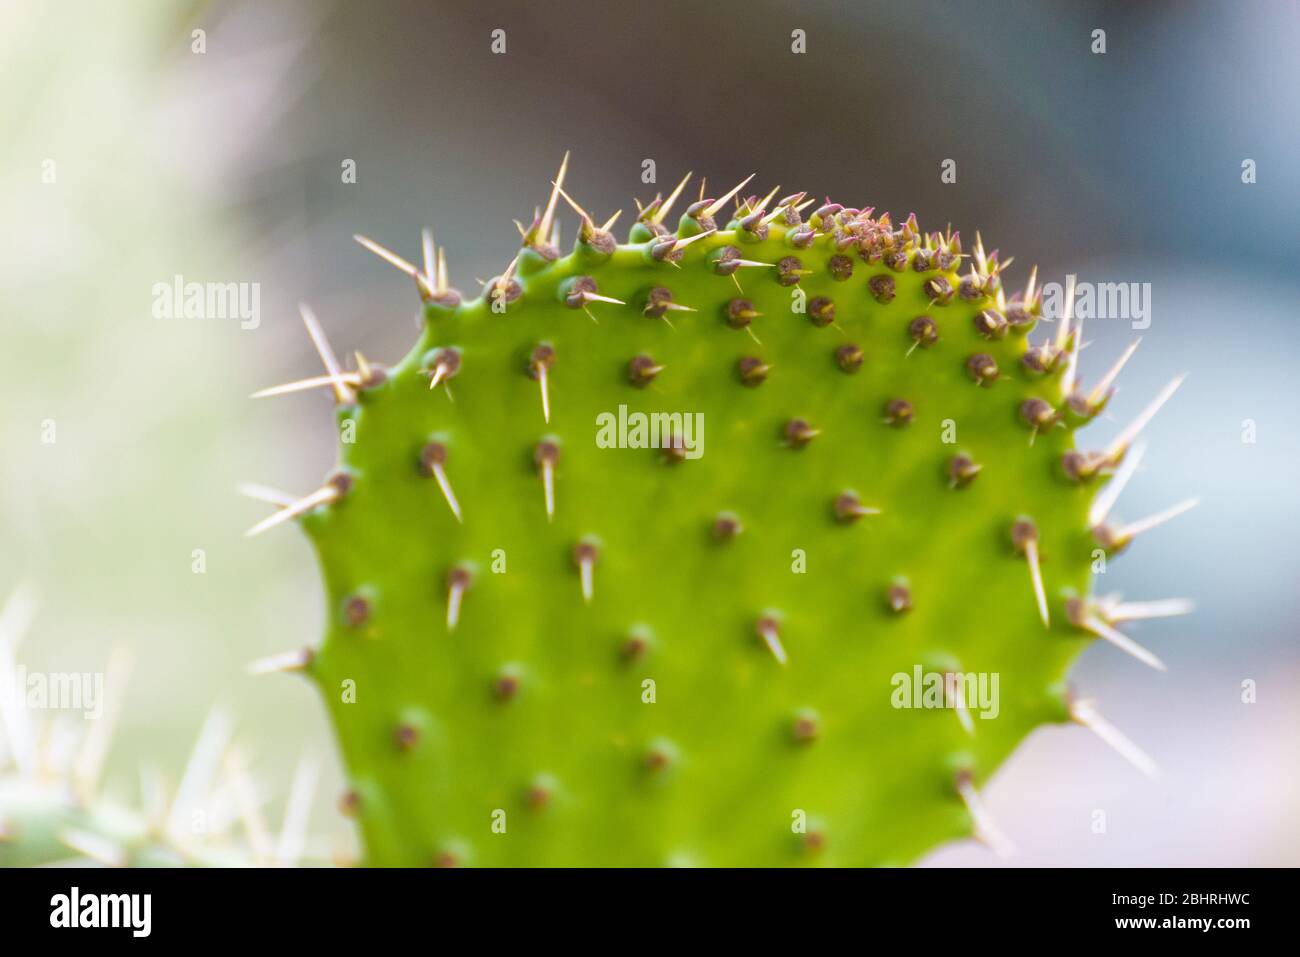 Close up on a thorny green prickly pears leaf (Opuntia ficus indica) or Barbary fig, a cactus with red, green and yellow fruit with succulent flesh. Stock Photo